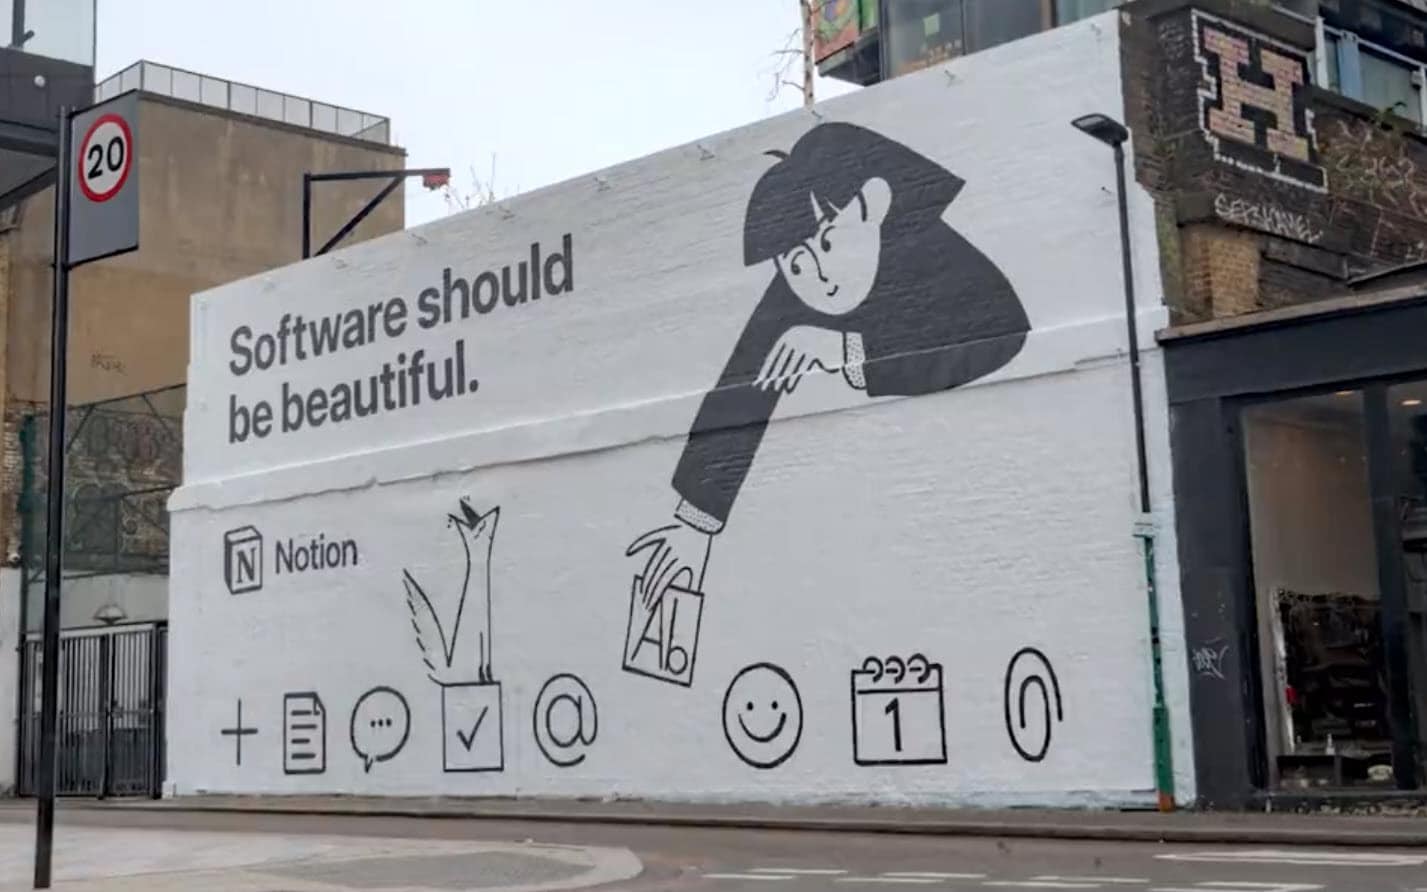 Software shoud be beautiful - by Notion